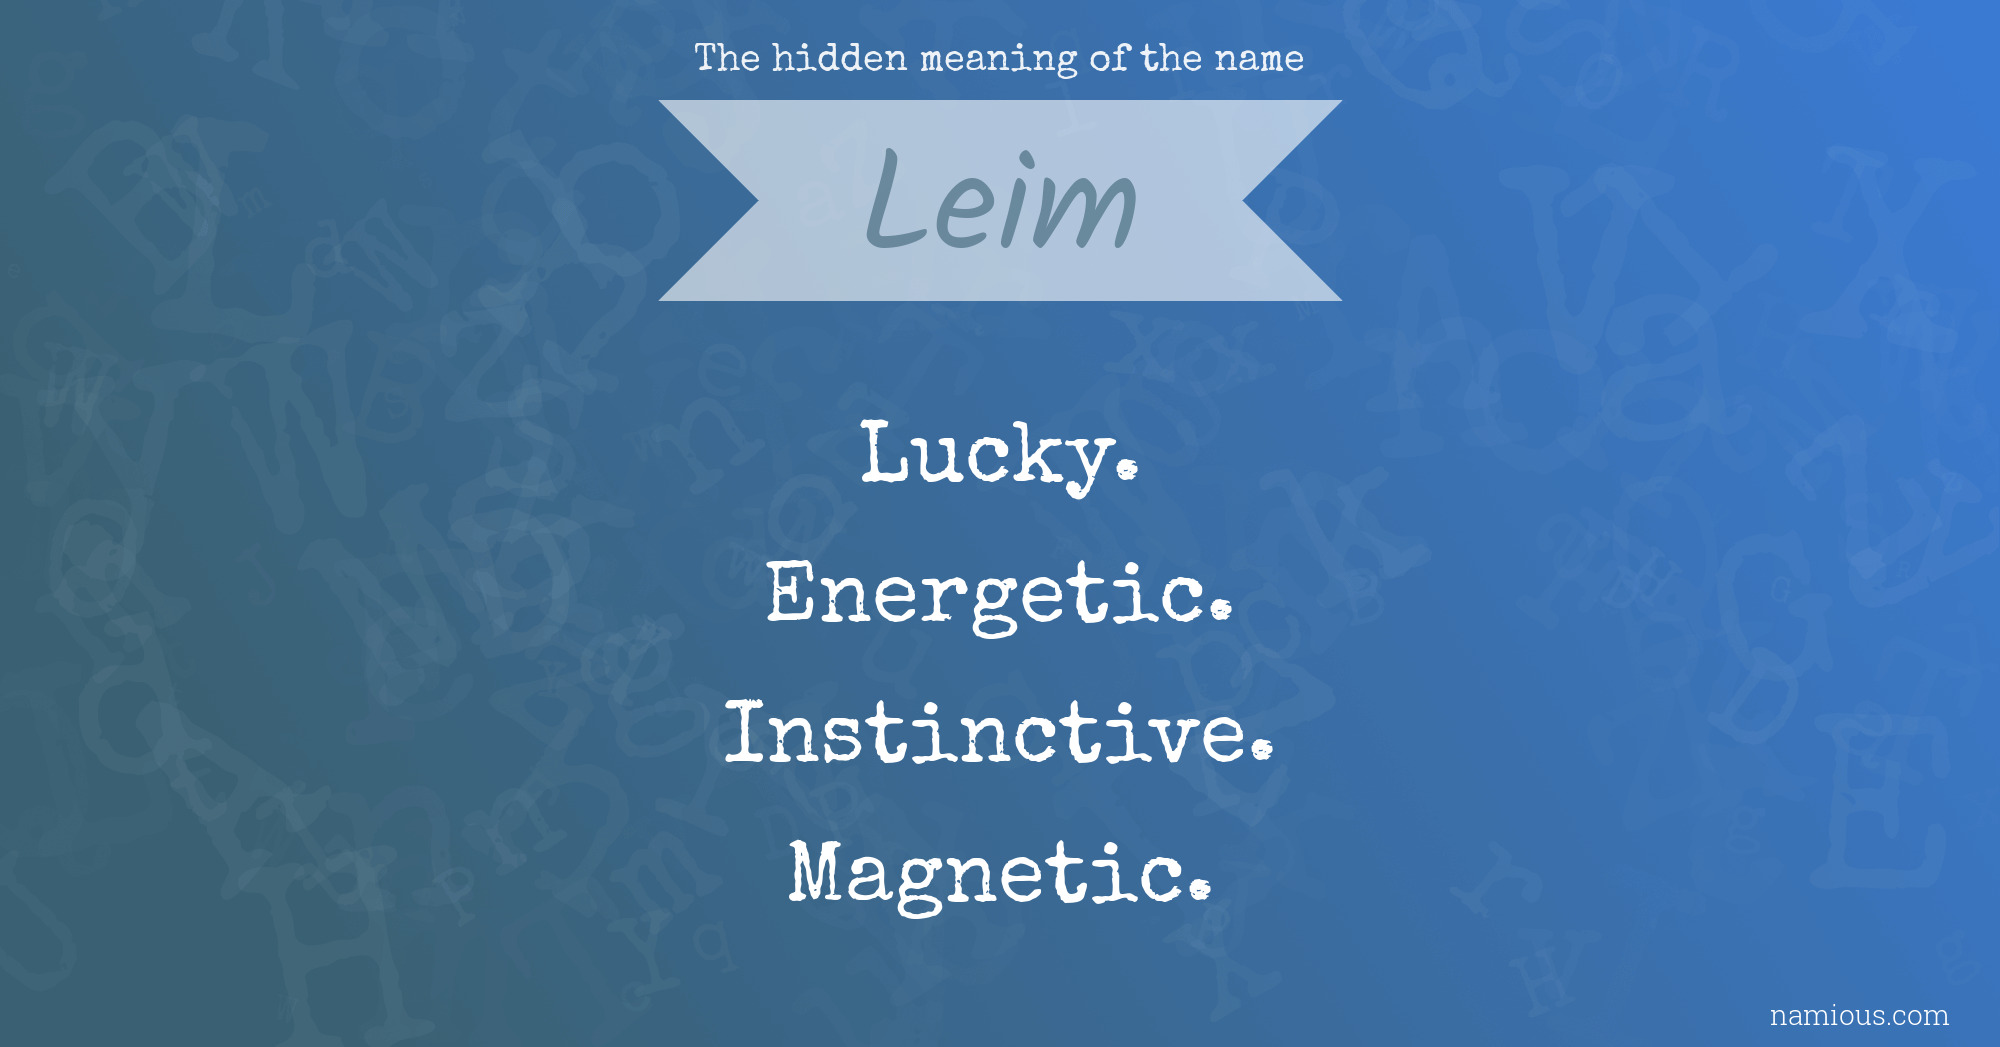 The hidden meaning of the name Leim